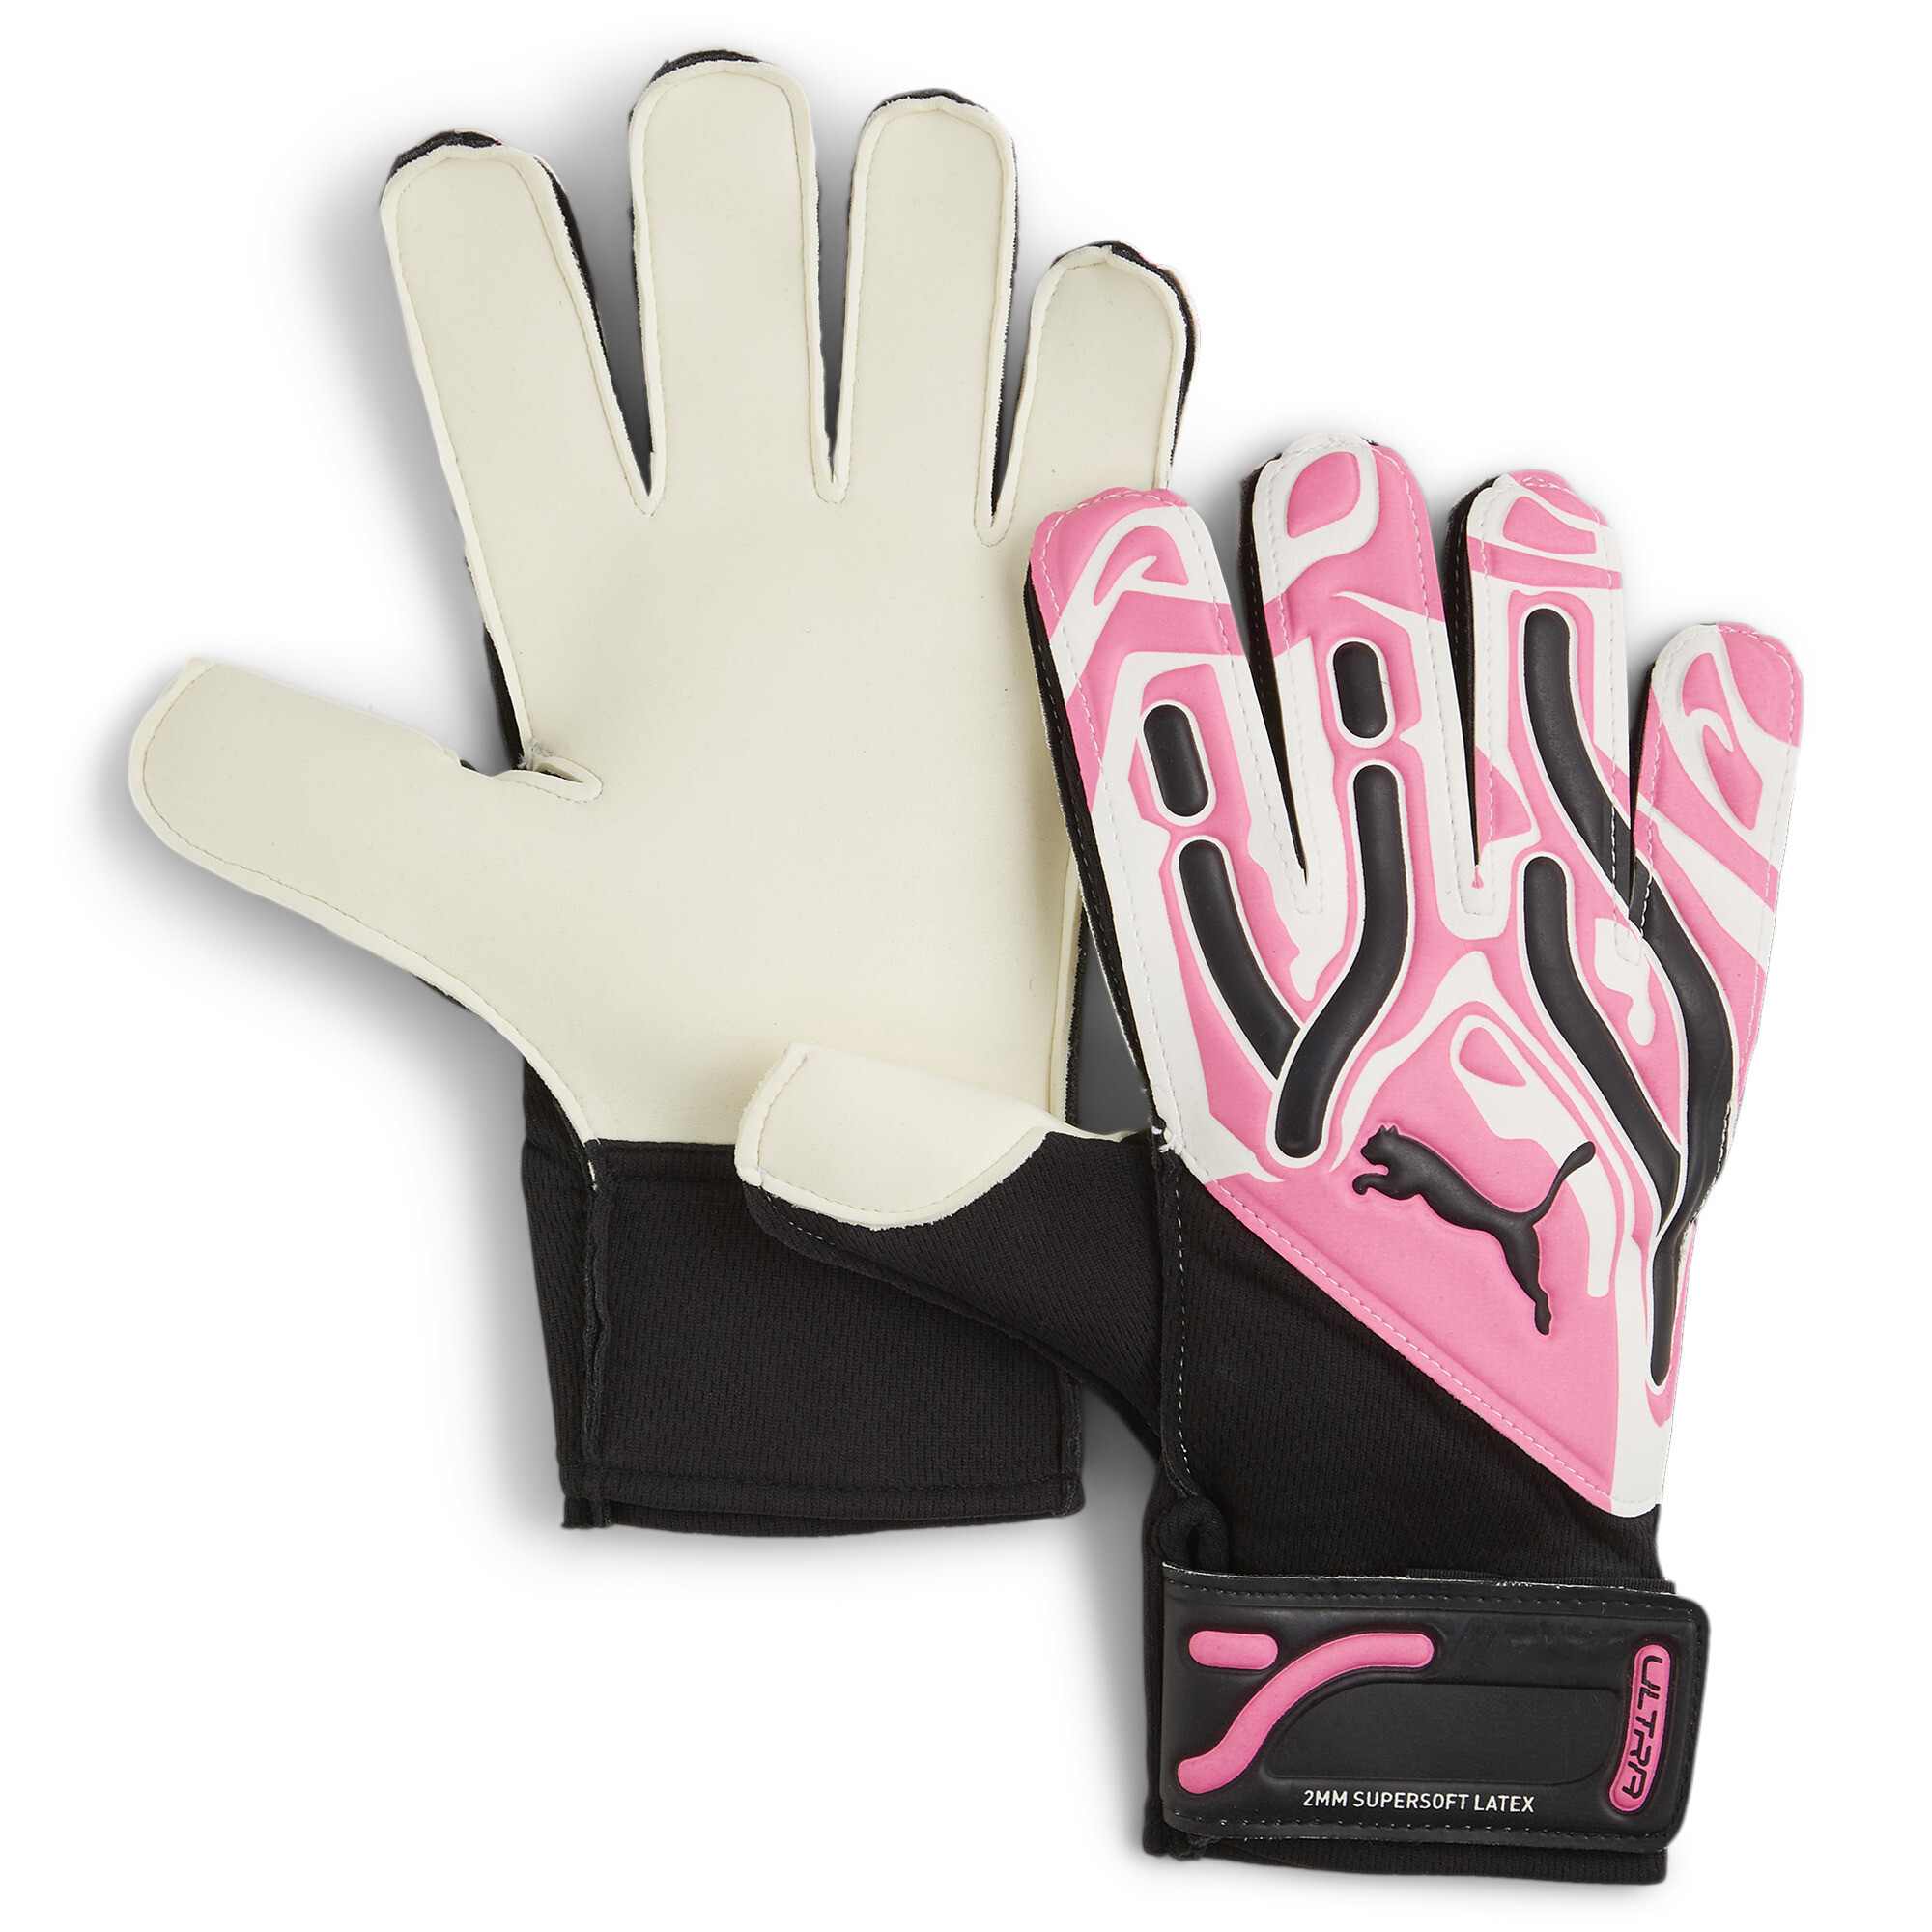 Puma ULTRA Play RC Goalkeeper Gloves, Pink, Size 6, Accessories